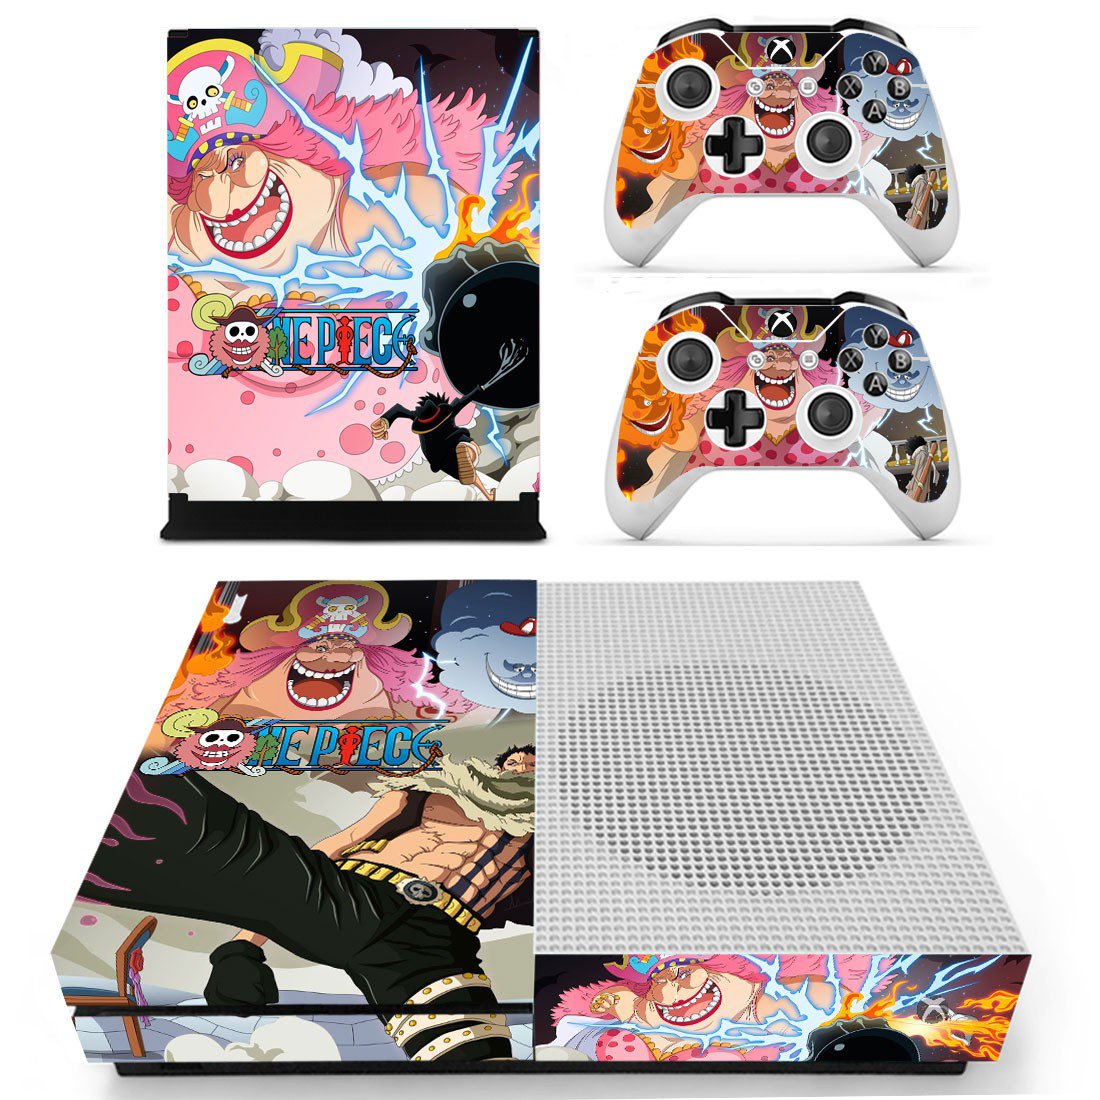 Xbox One S And Controllers Skin Sticker - One Piece